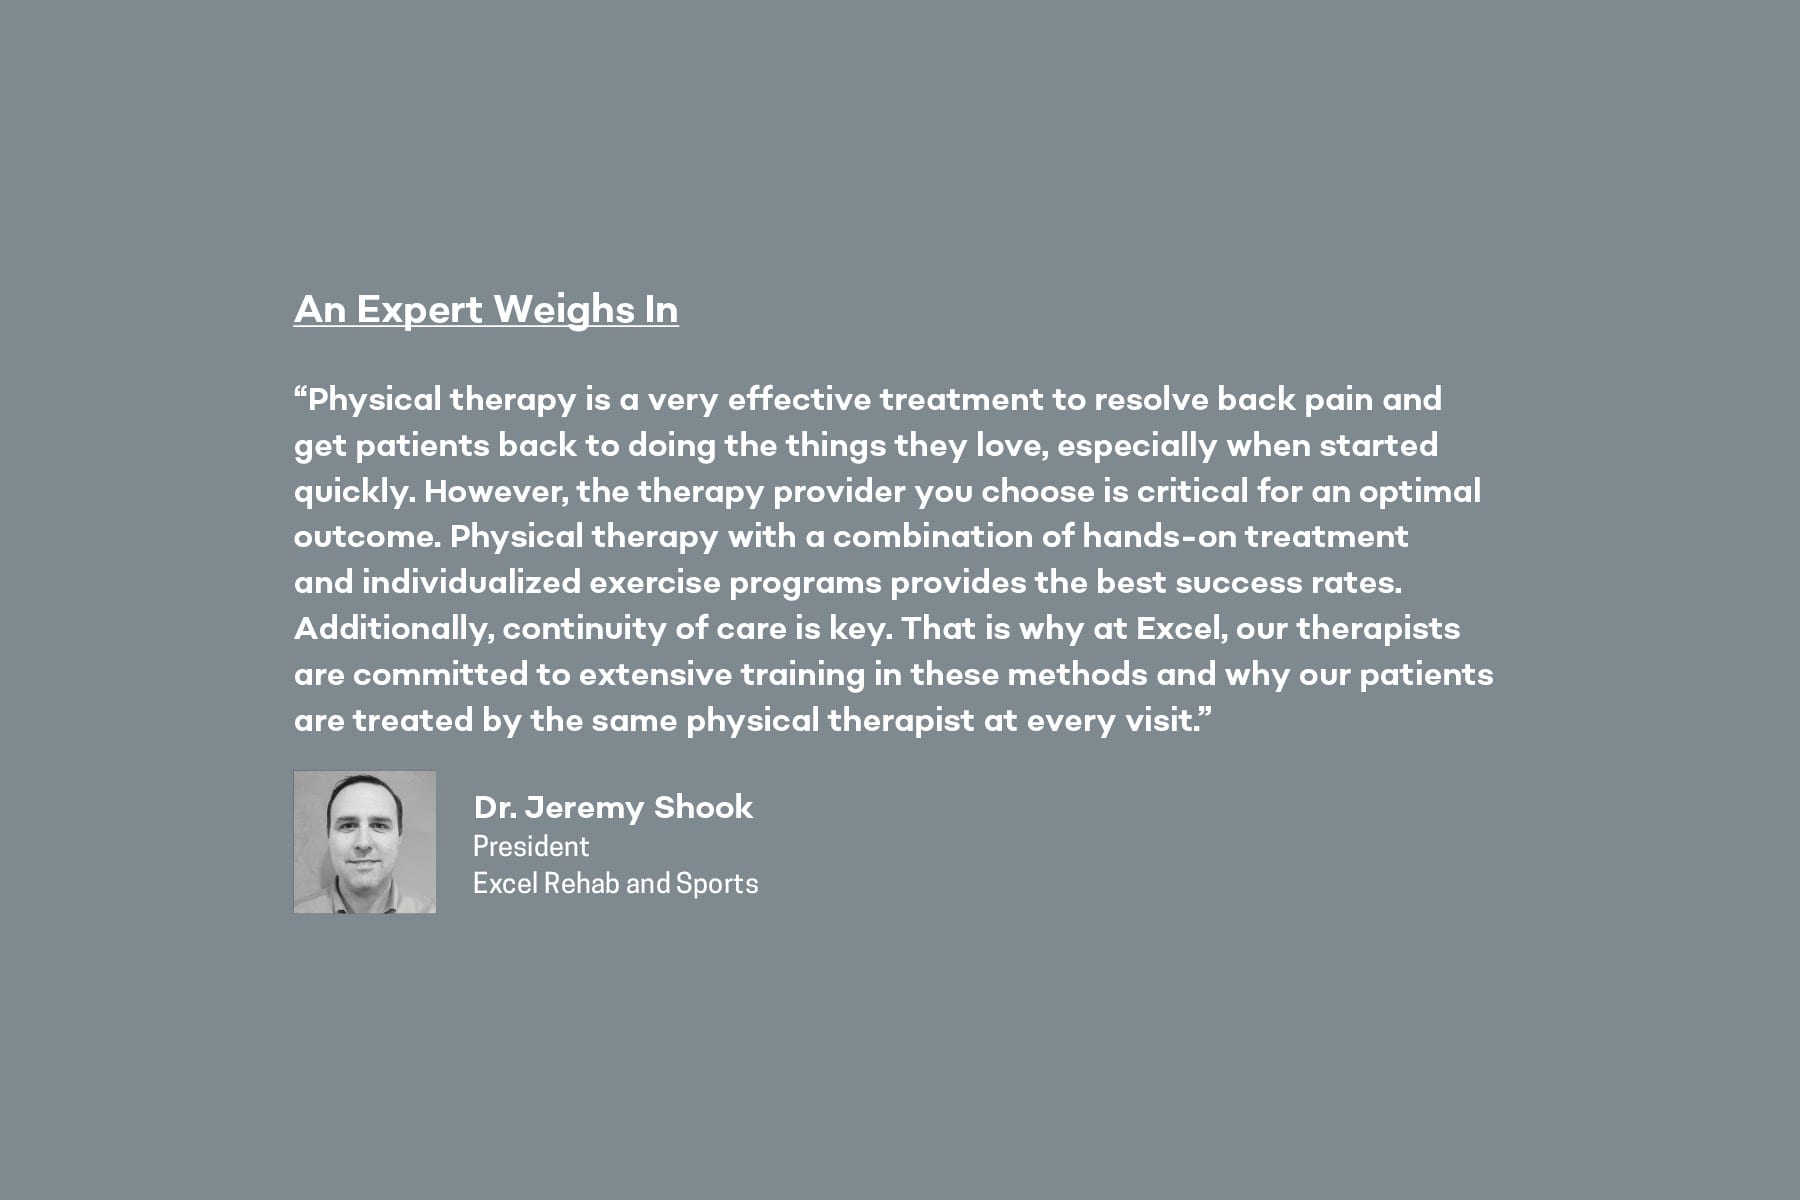 Dr. Jeremy Shook President Excel Rehab and Sports expert opinion on early physical therapy for acute low back pain